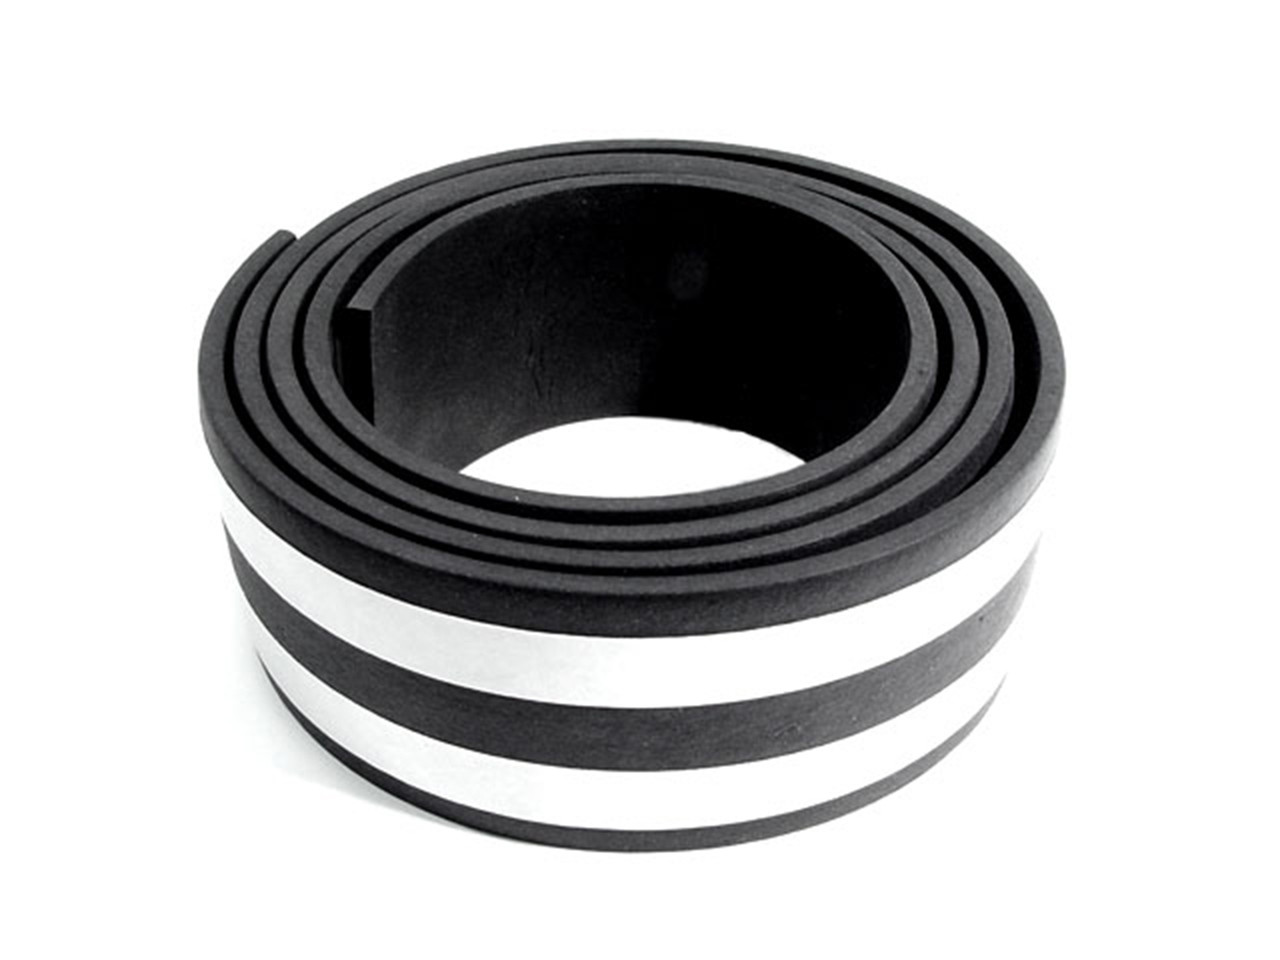 Adhesive Backed Camper/Topper Seal. 2 inch wide, 1/4 inch thick